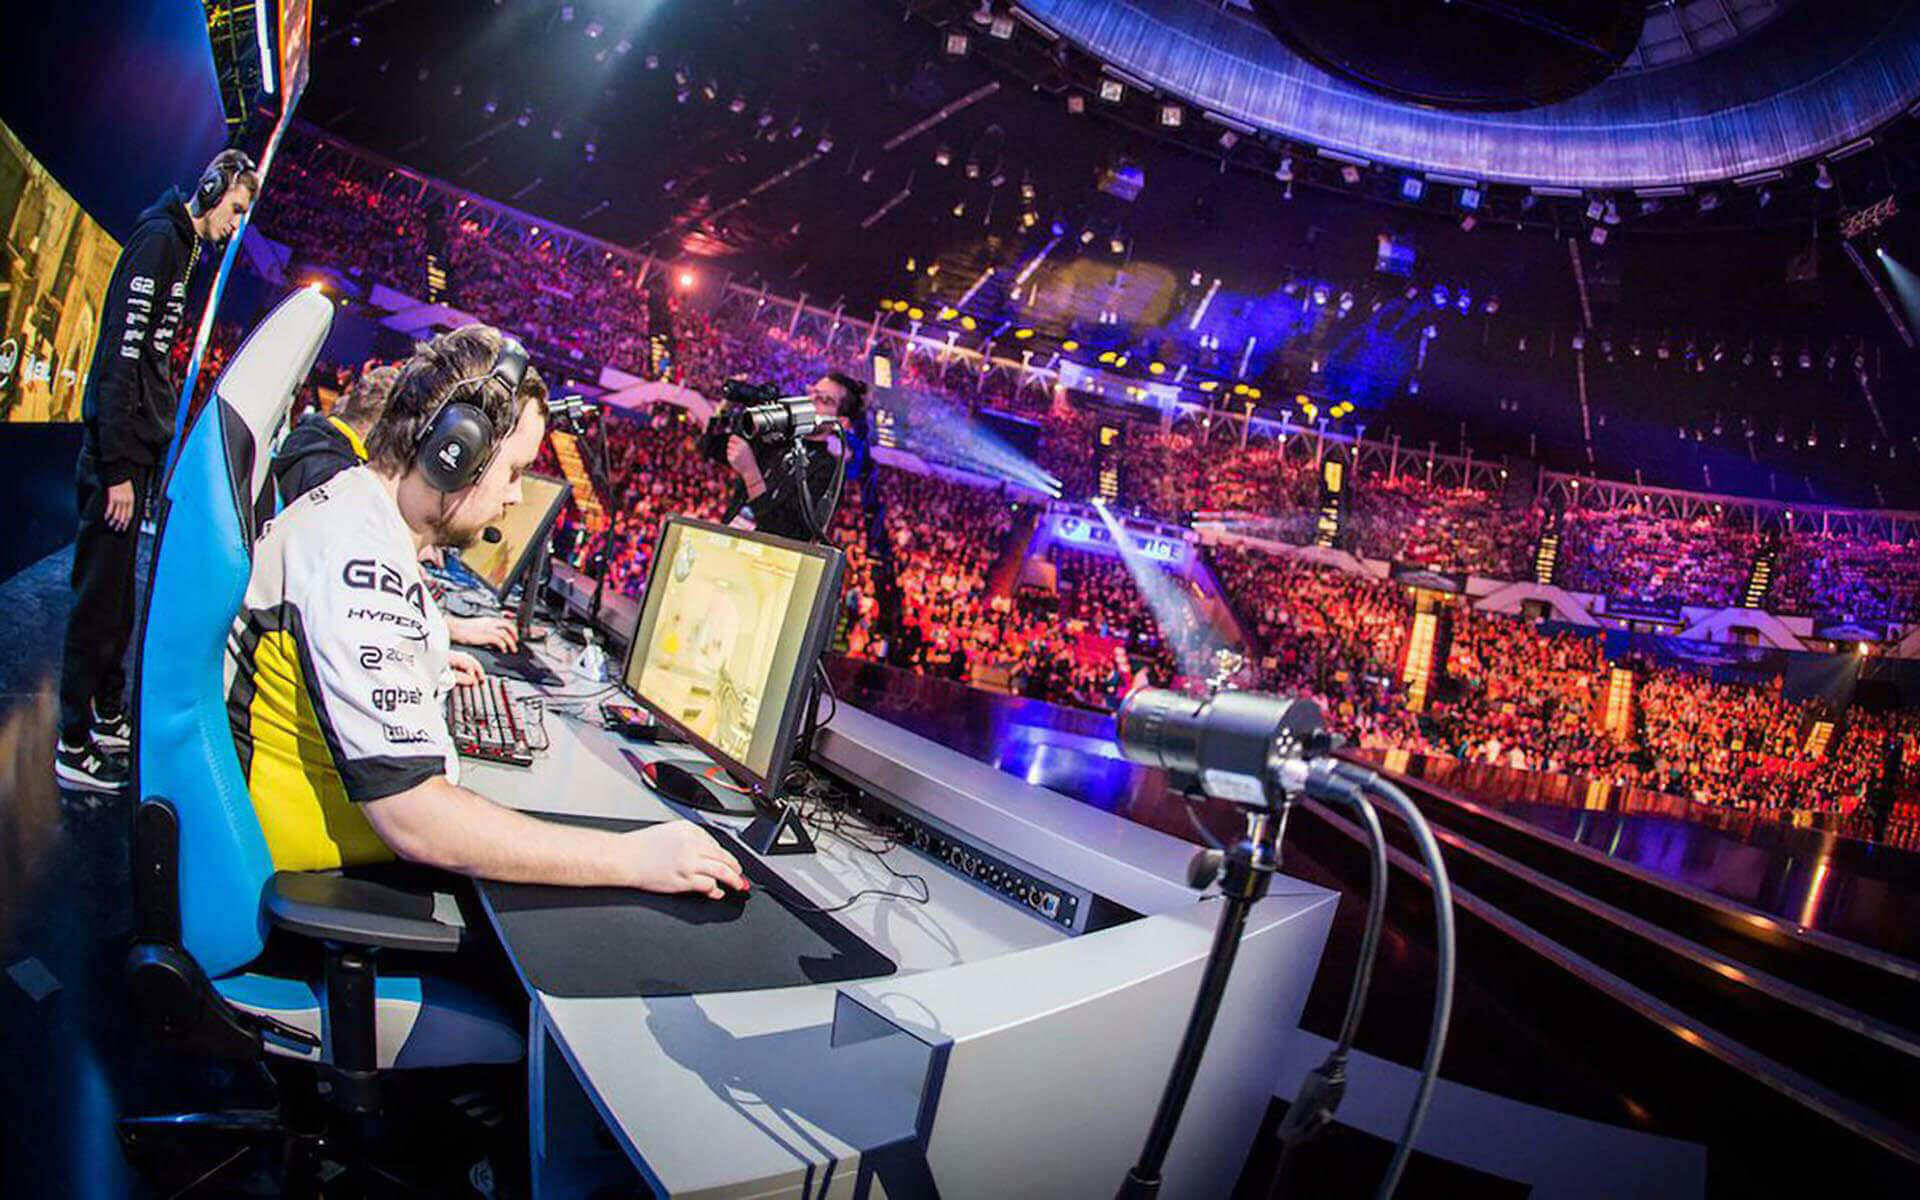 How eSports players live and train and why betting on eSports became very popular